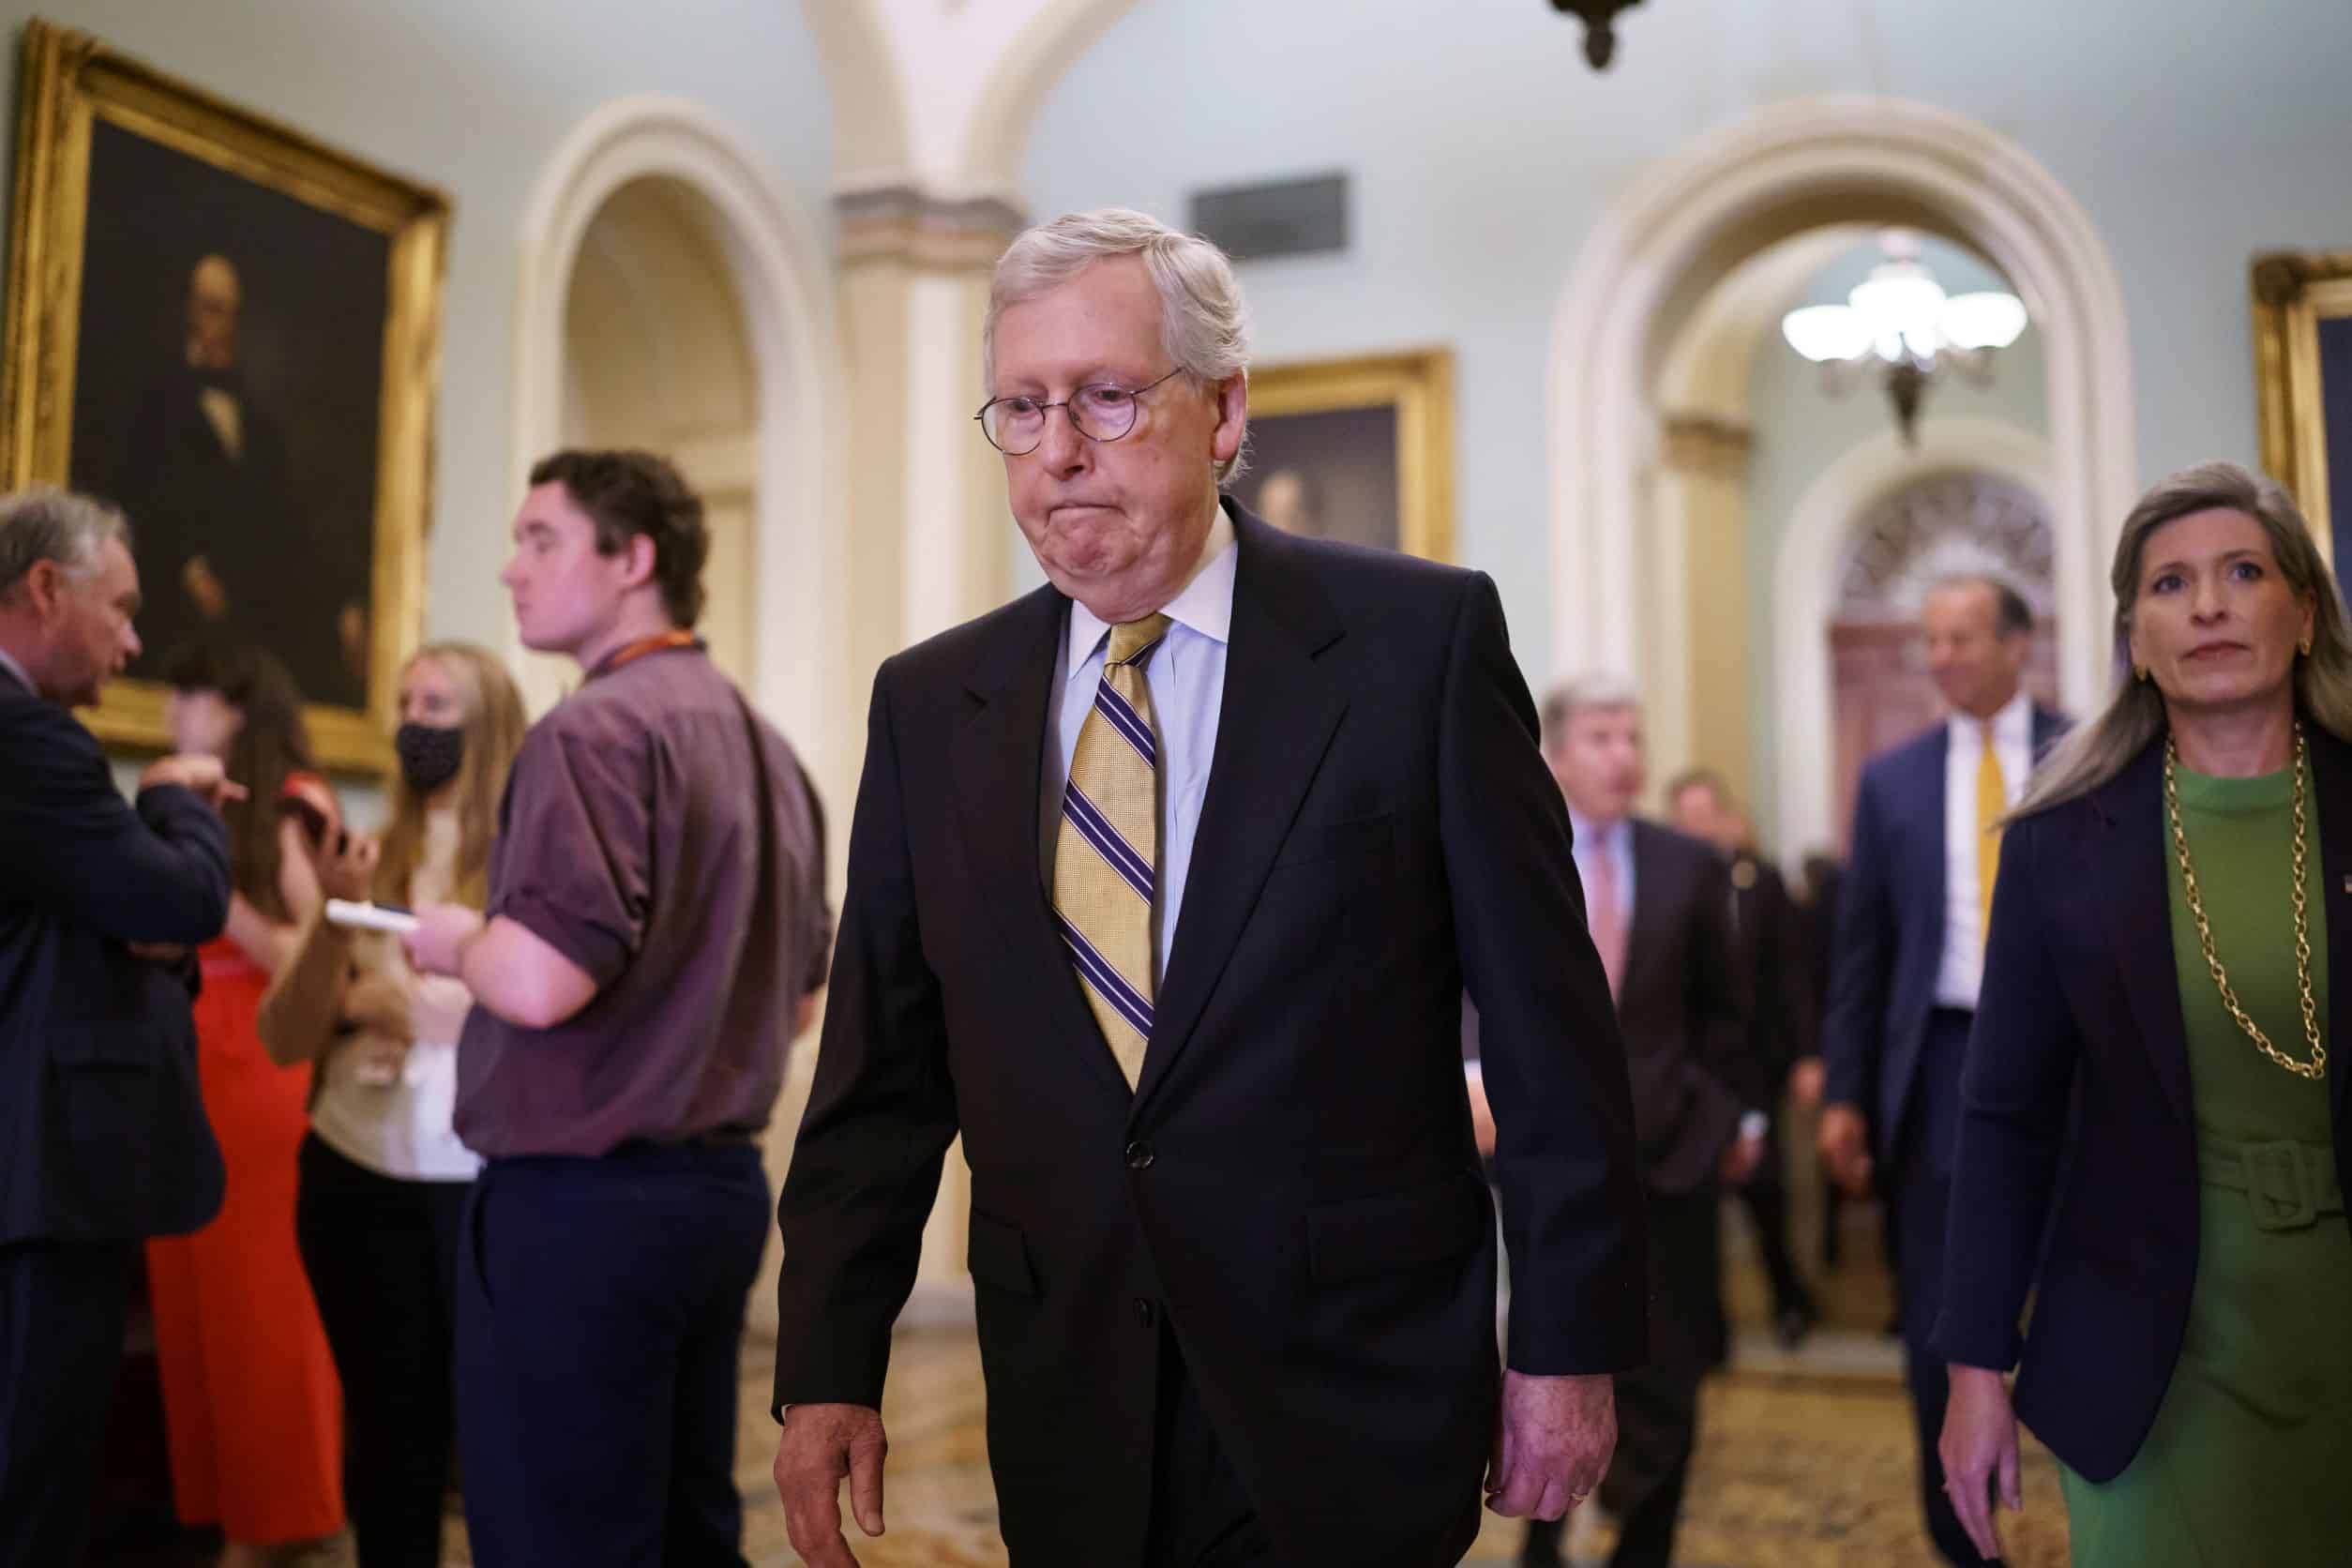 Big Infrastructure Bill in Peril as GOP Threatens Filibuster